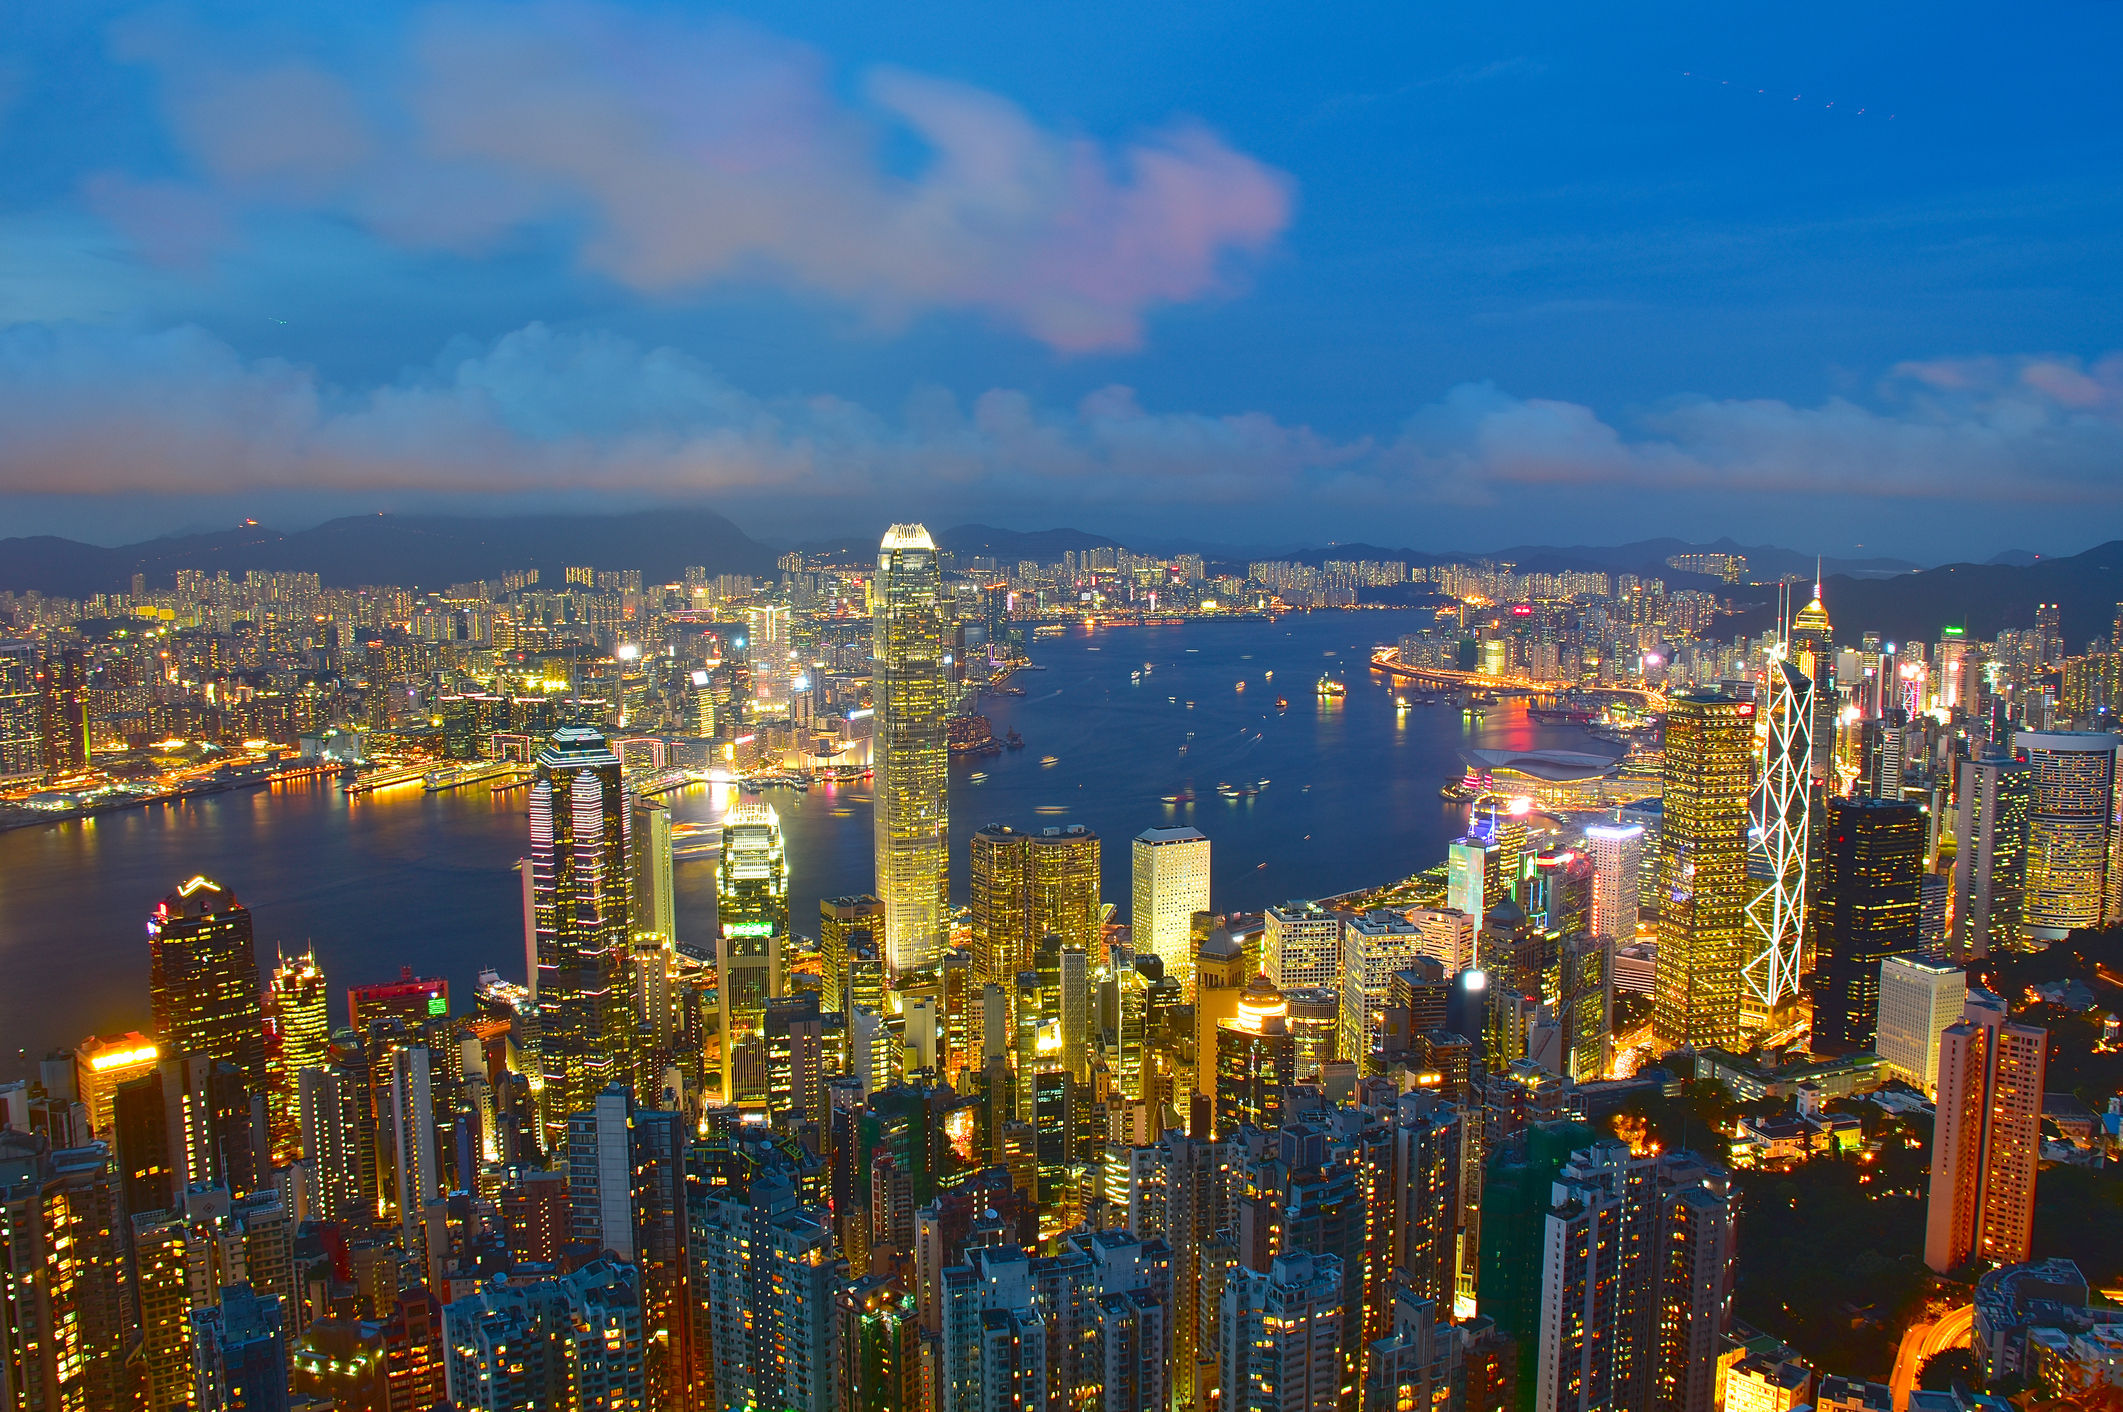 Hong Kong named one of the world’s best cities to live in